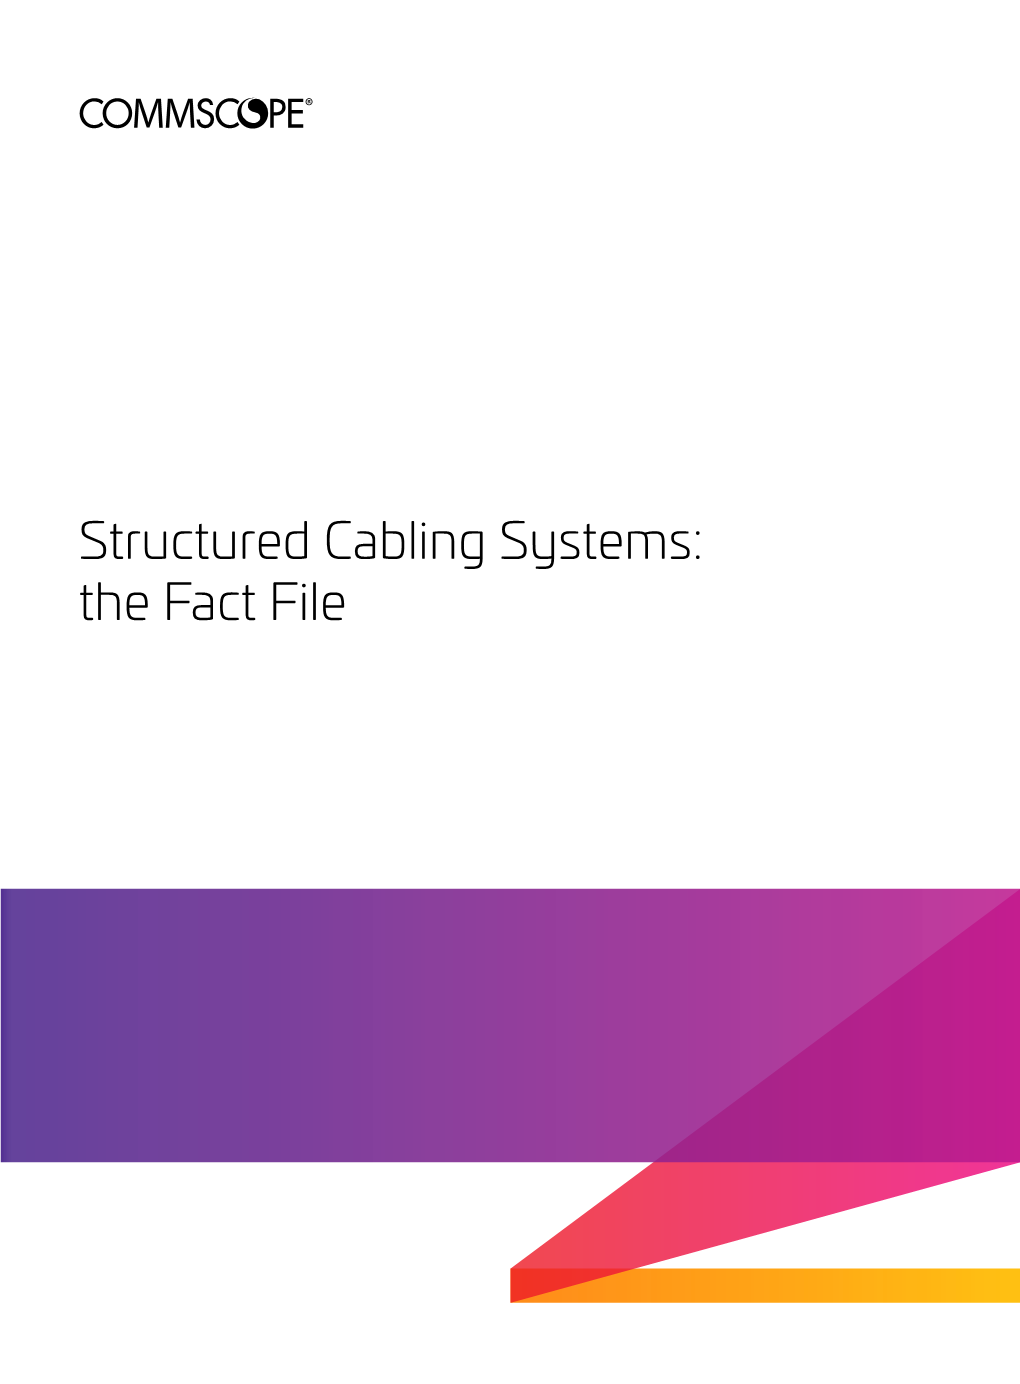 Structured Cabling Systems: the Fact File Contents